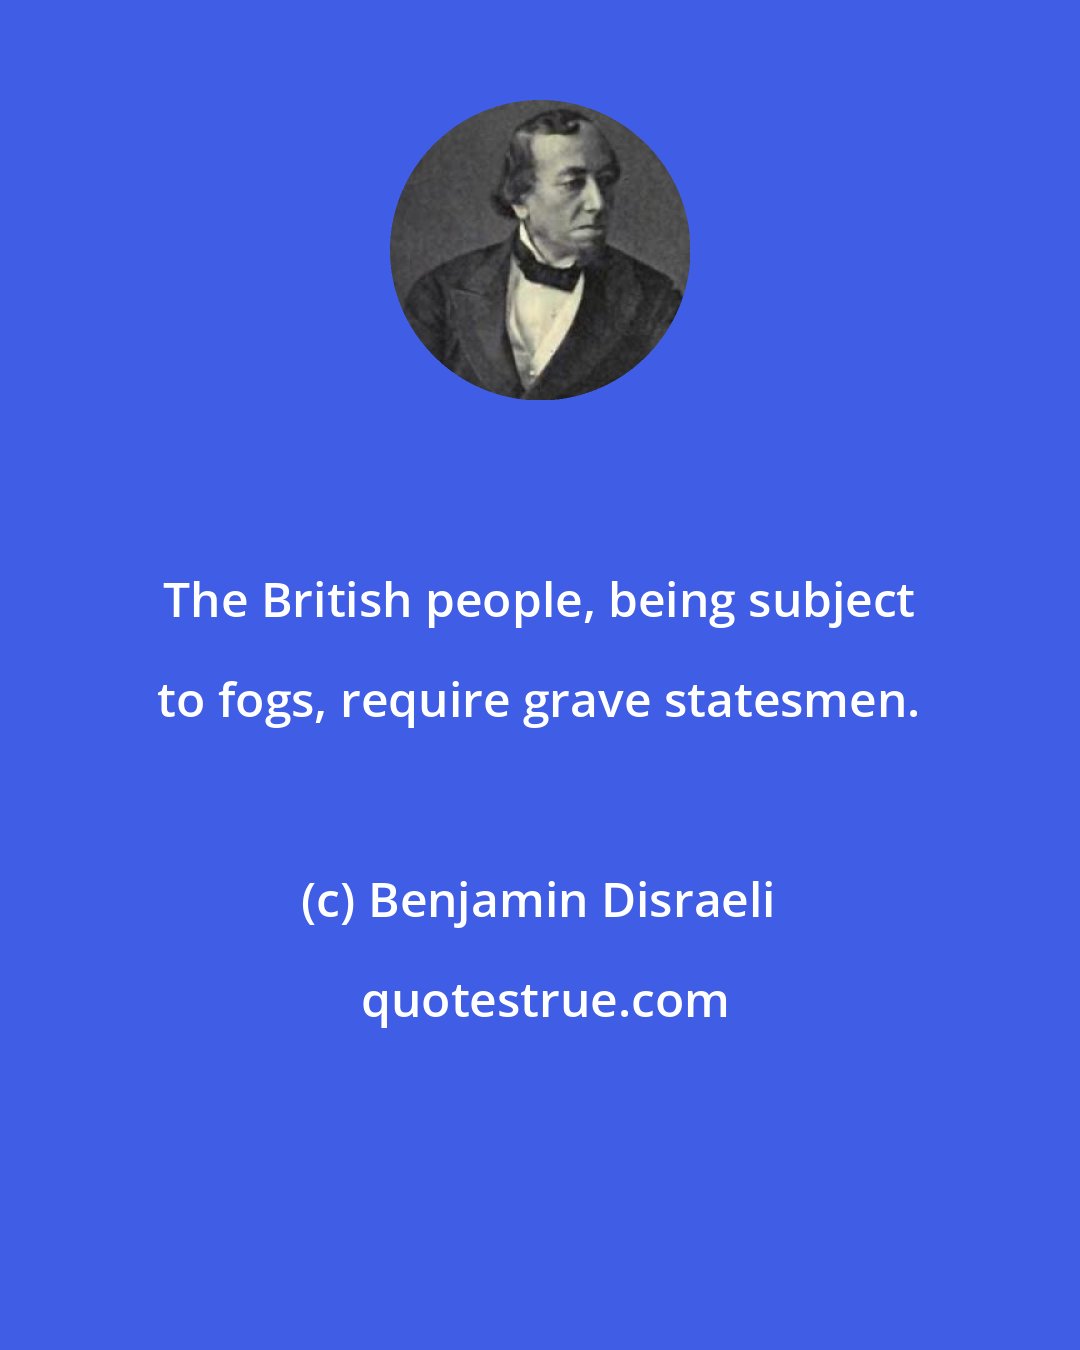 Benjamin Disraeli: The British people, being subject to fogs, require grave statesmen.